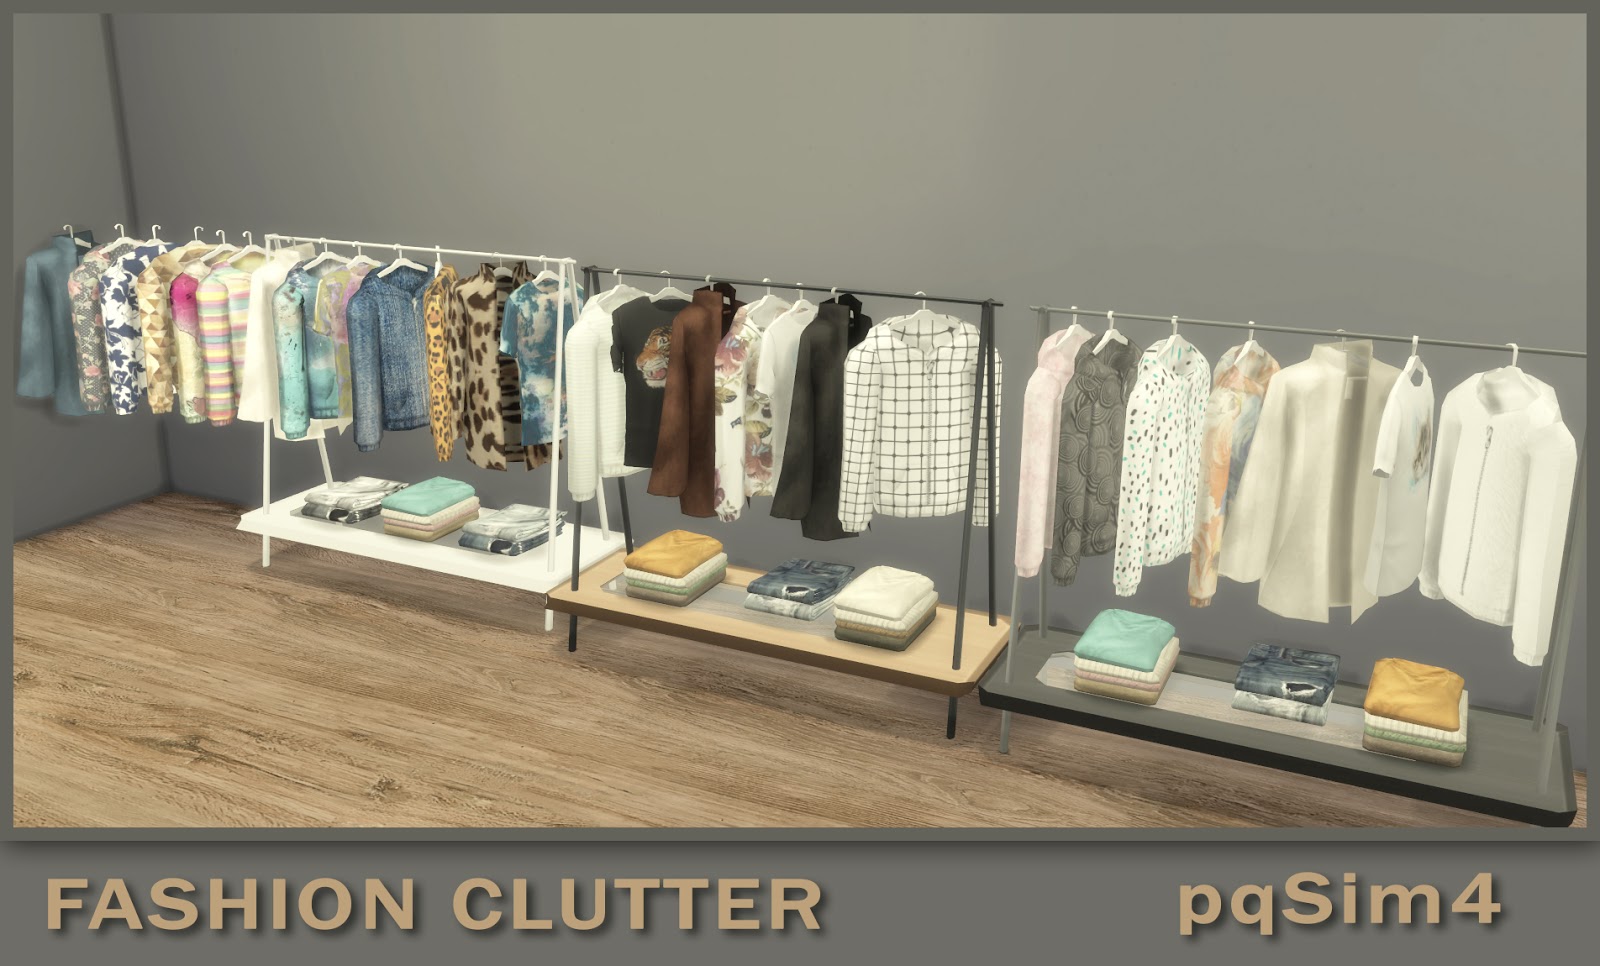 Fashion Clutter The Sims 4 Custom Content